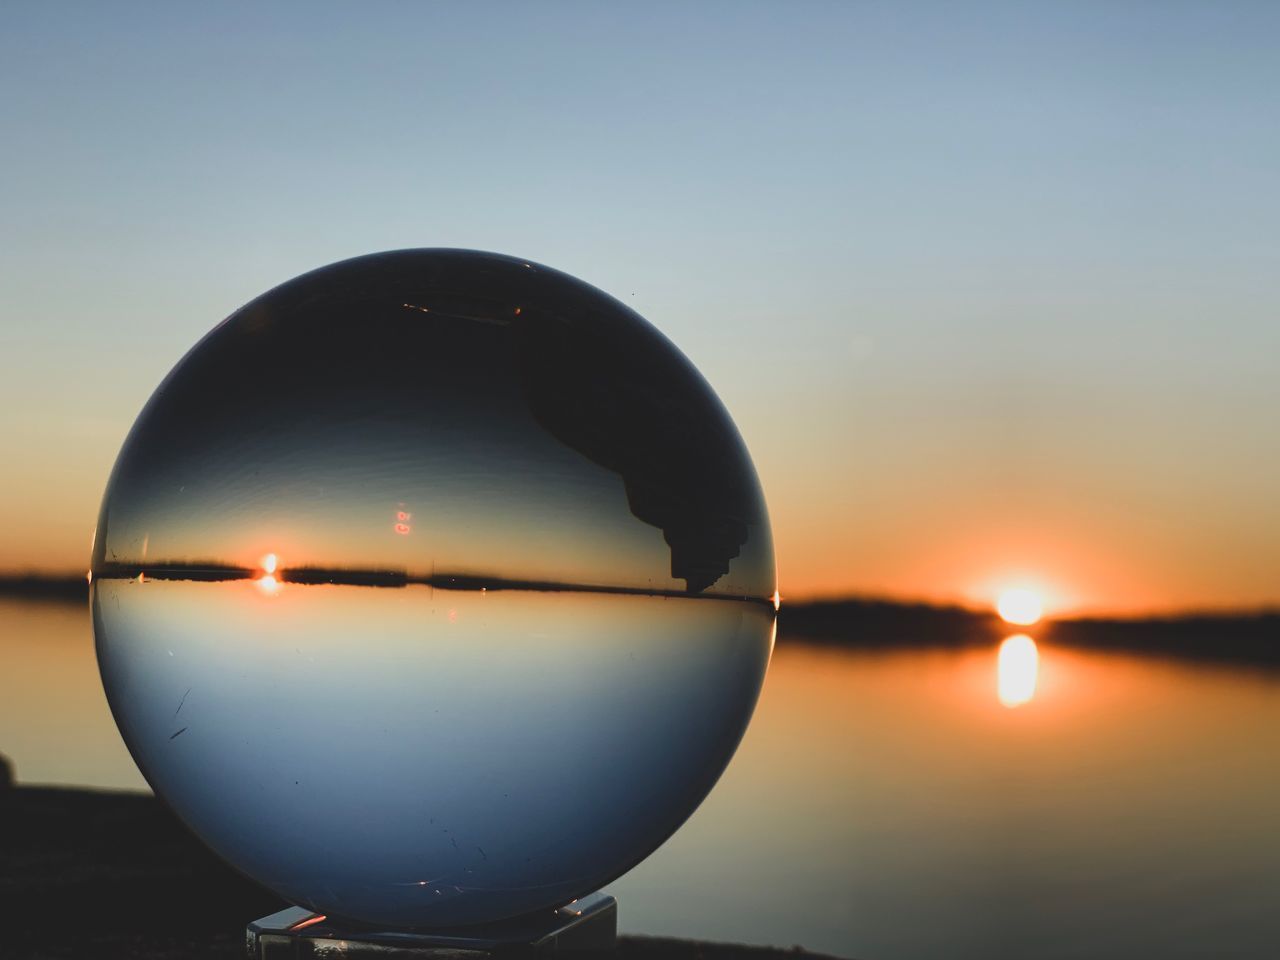 CLOSE-UP OF CRYSTAL BALL AGAINST SUNSET